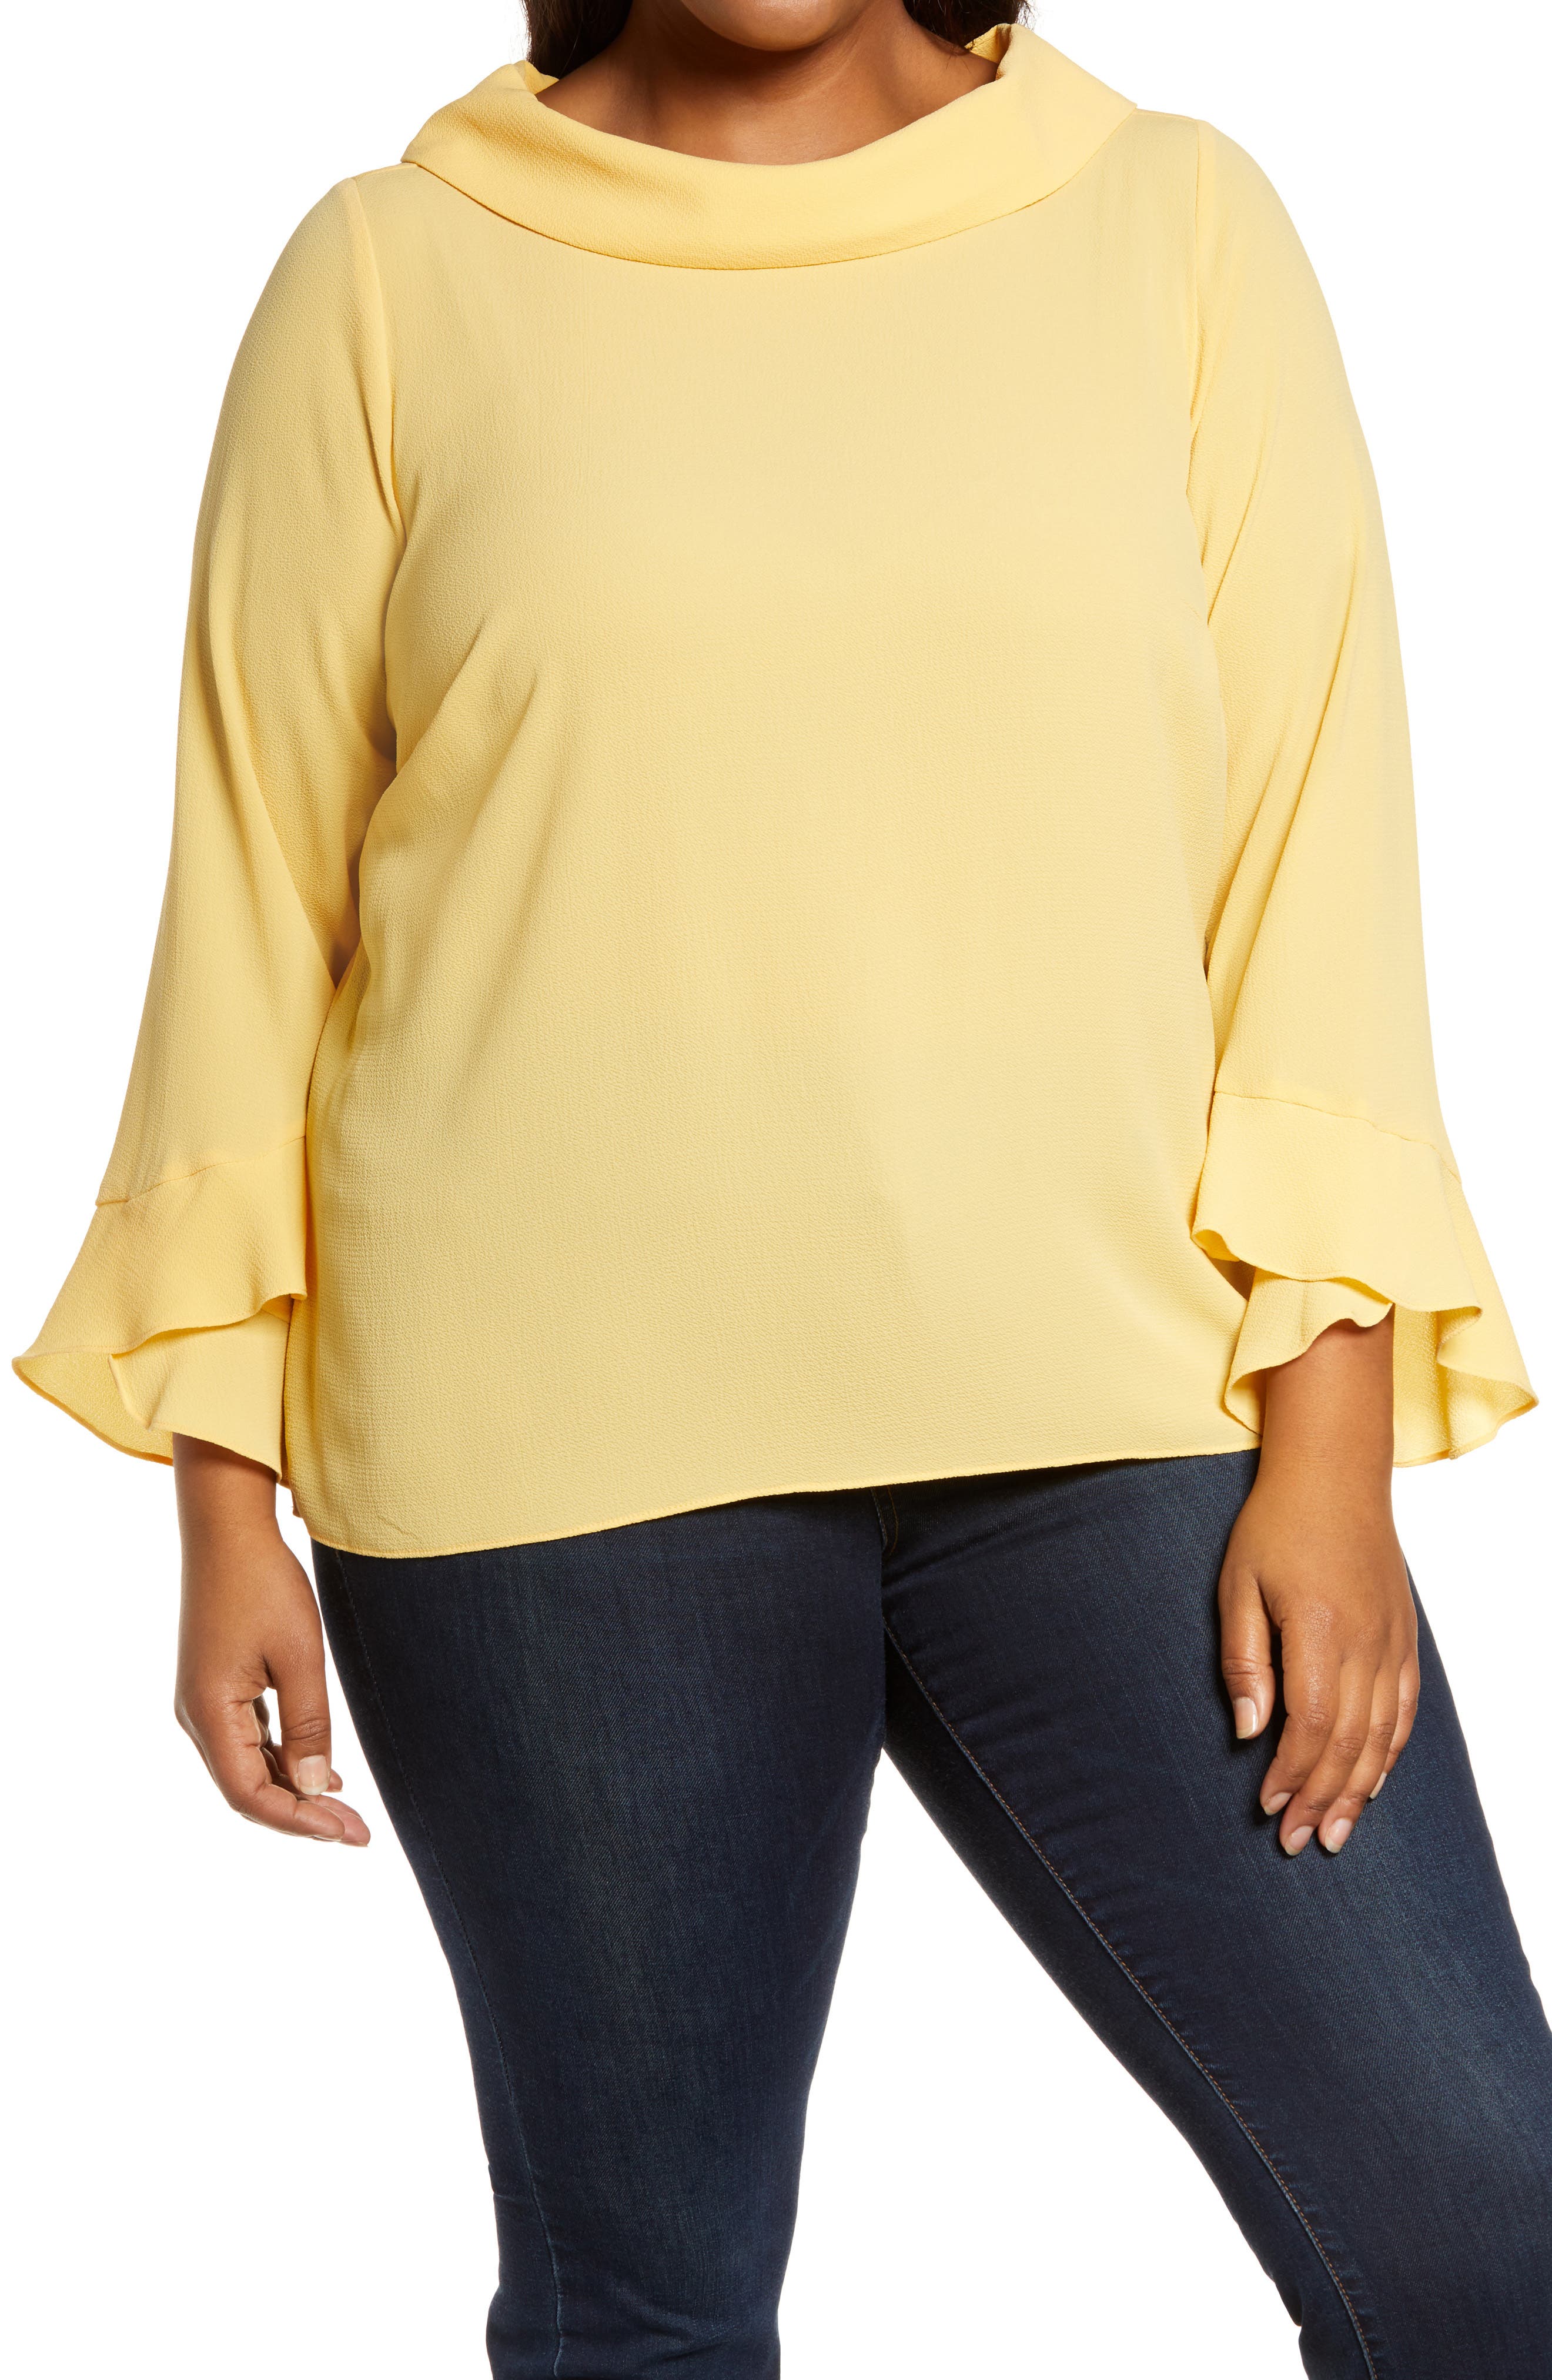 vince camuto yellow blouse